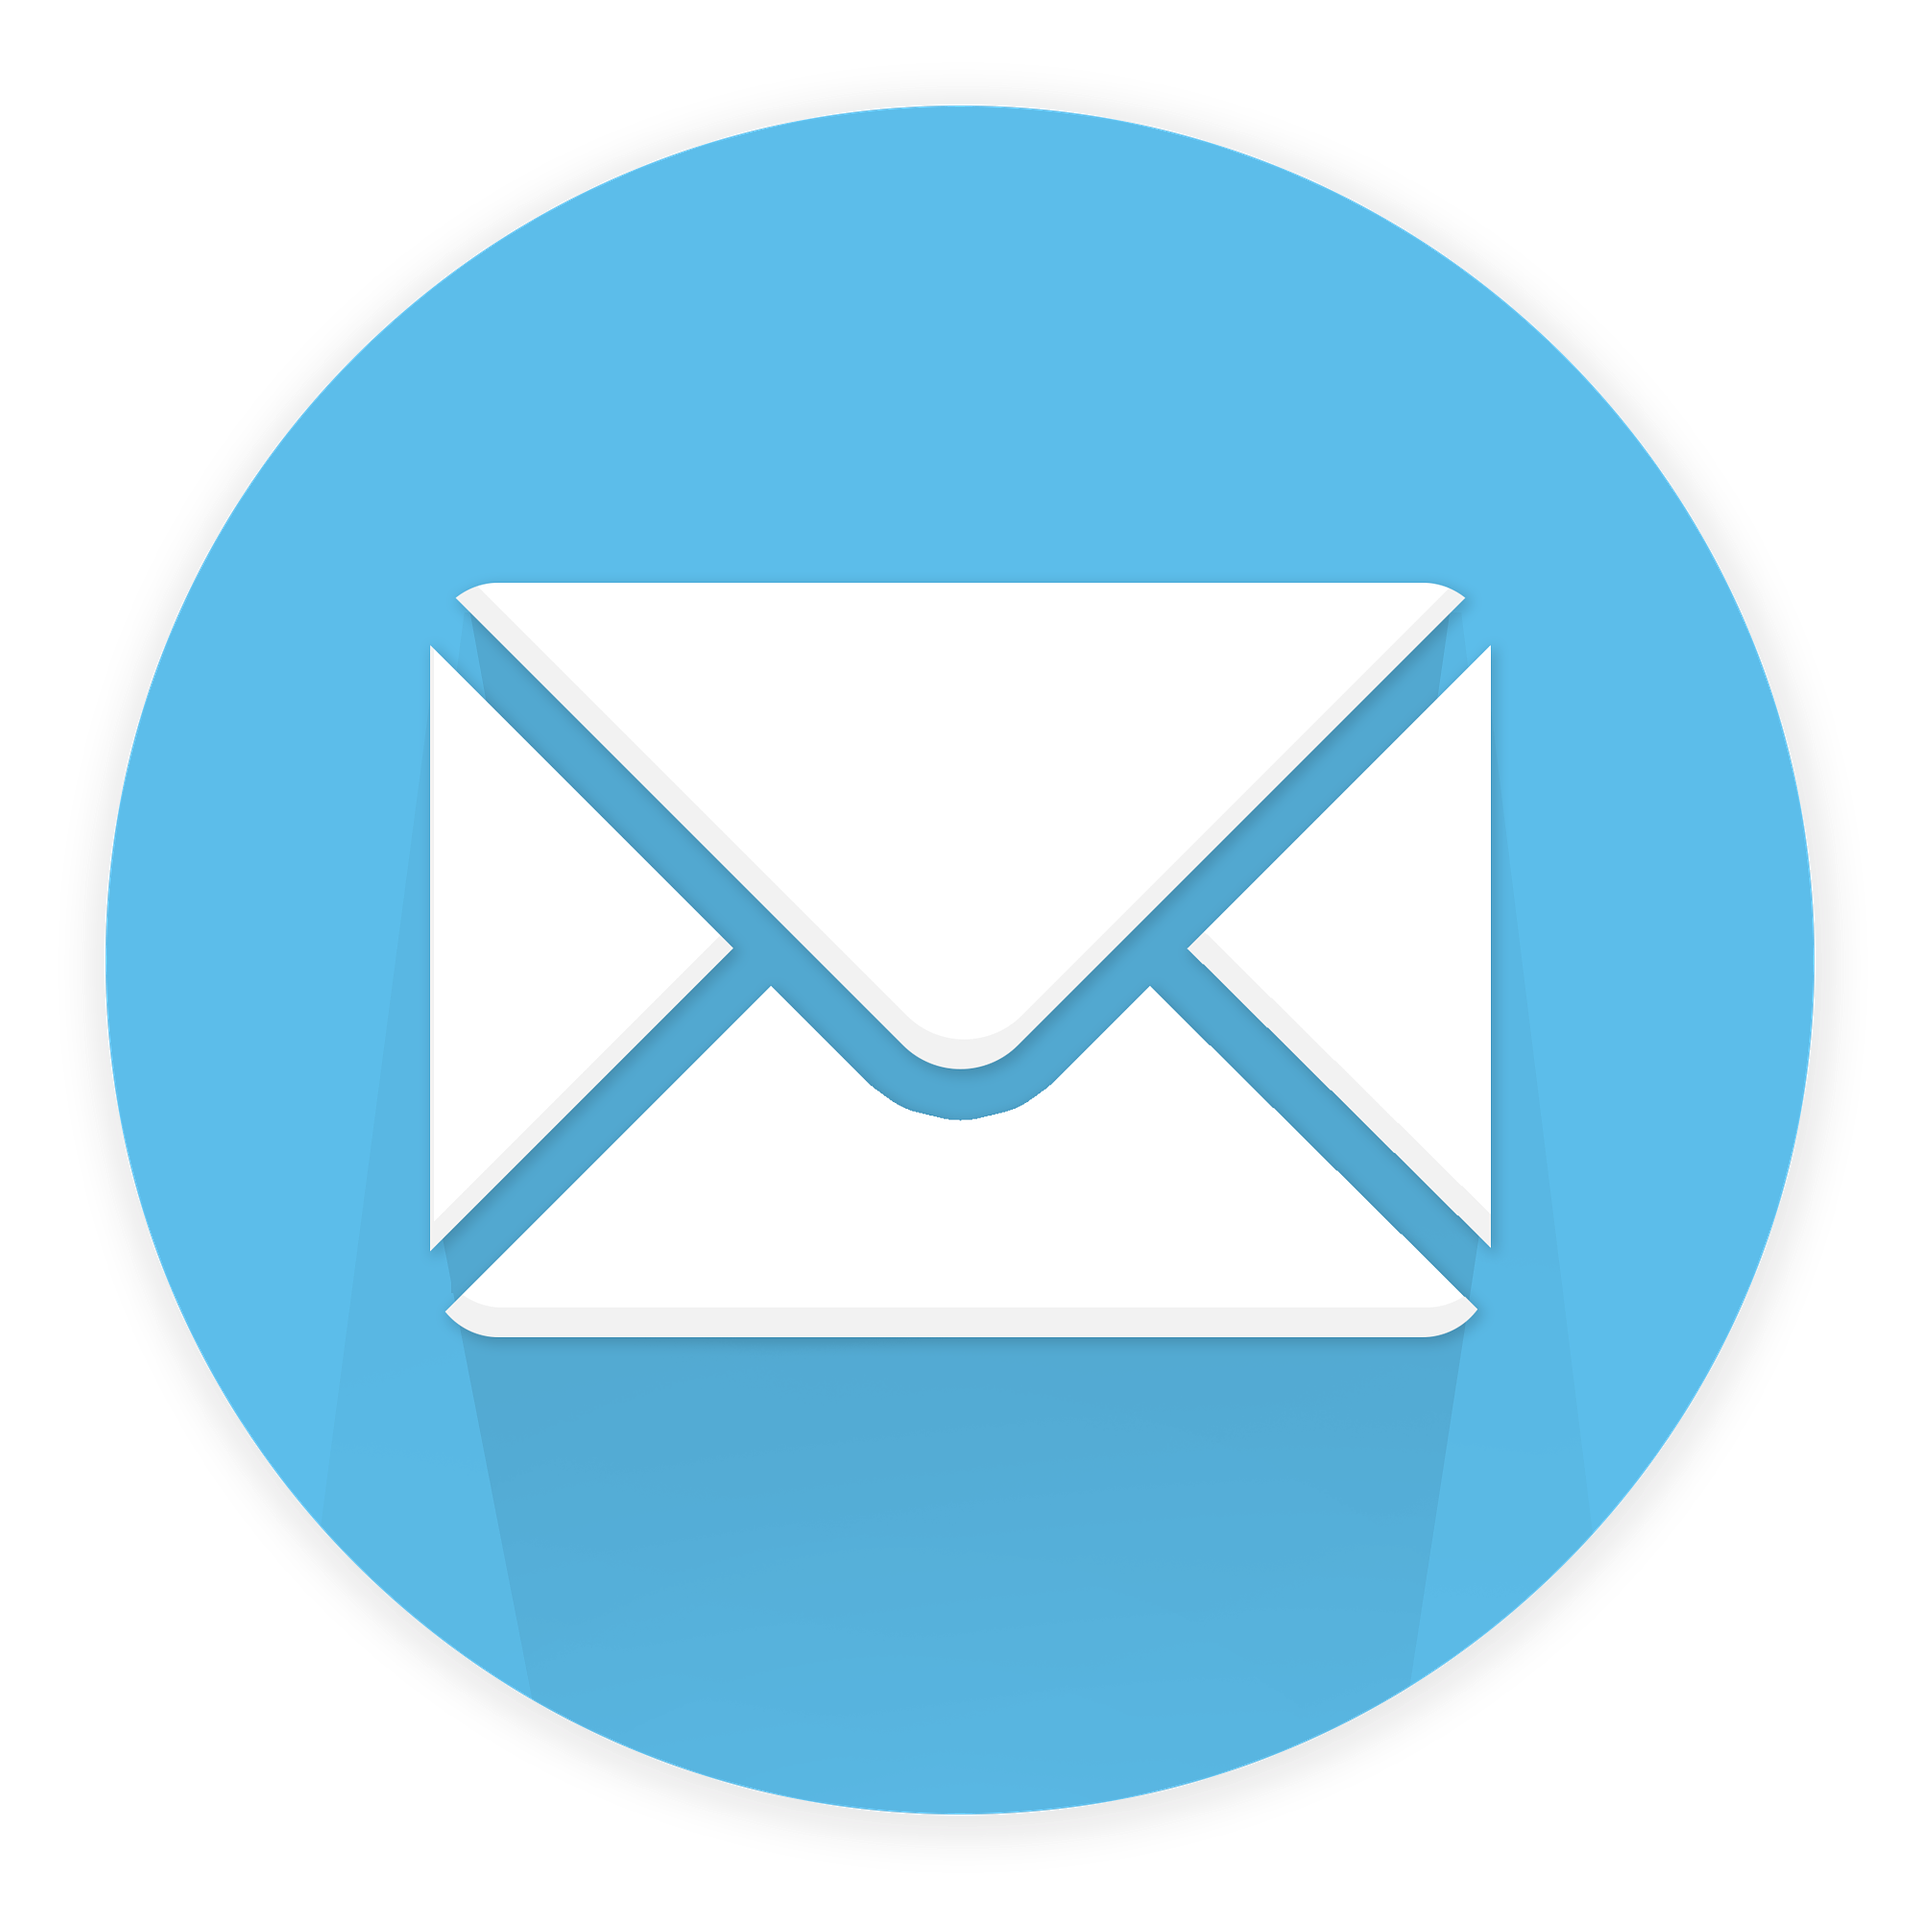 The email symbol of white envelope on a blue circle.